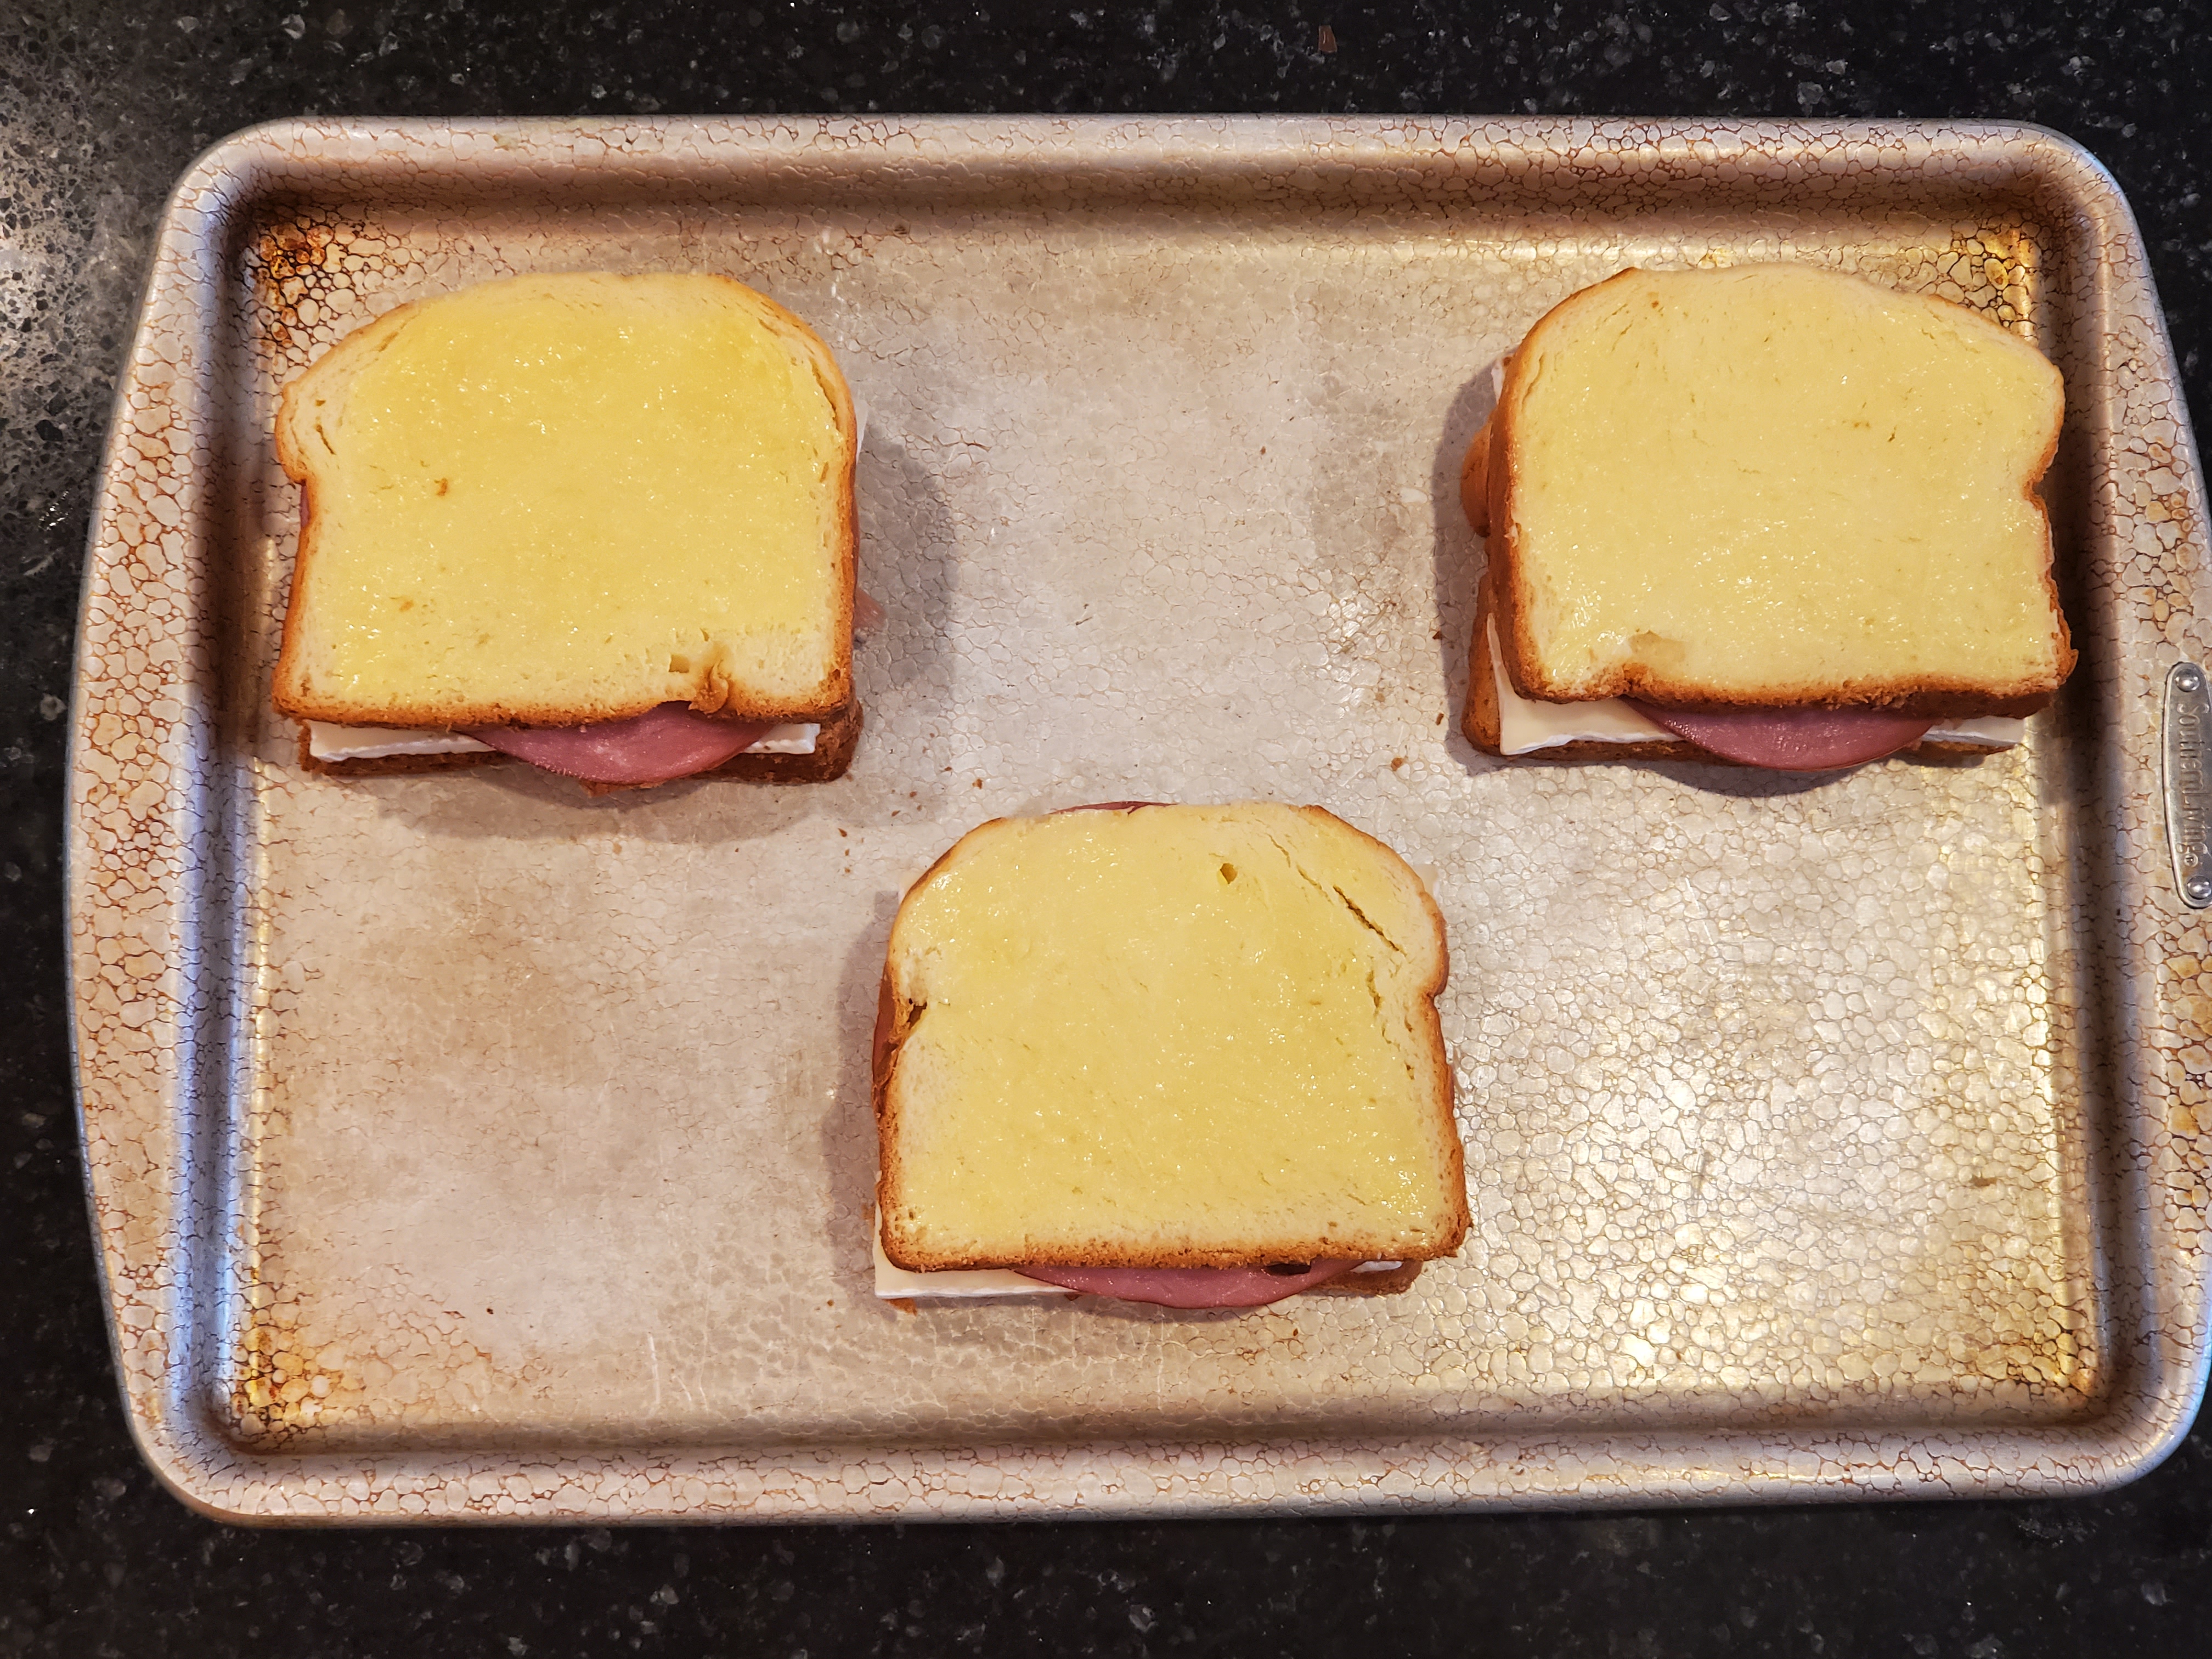 The three sandwiches are now assembled on top of the baking sheet, butter side up, ready to go in the oven.